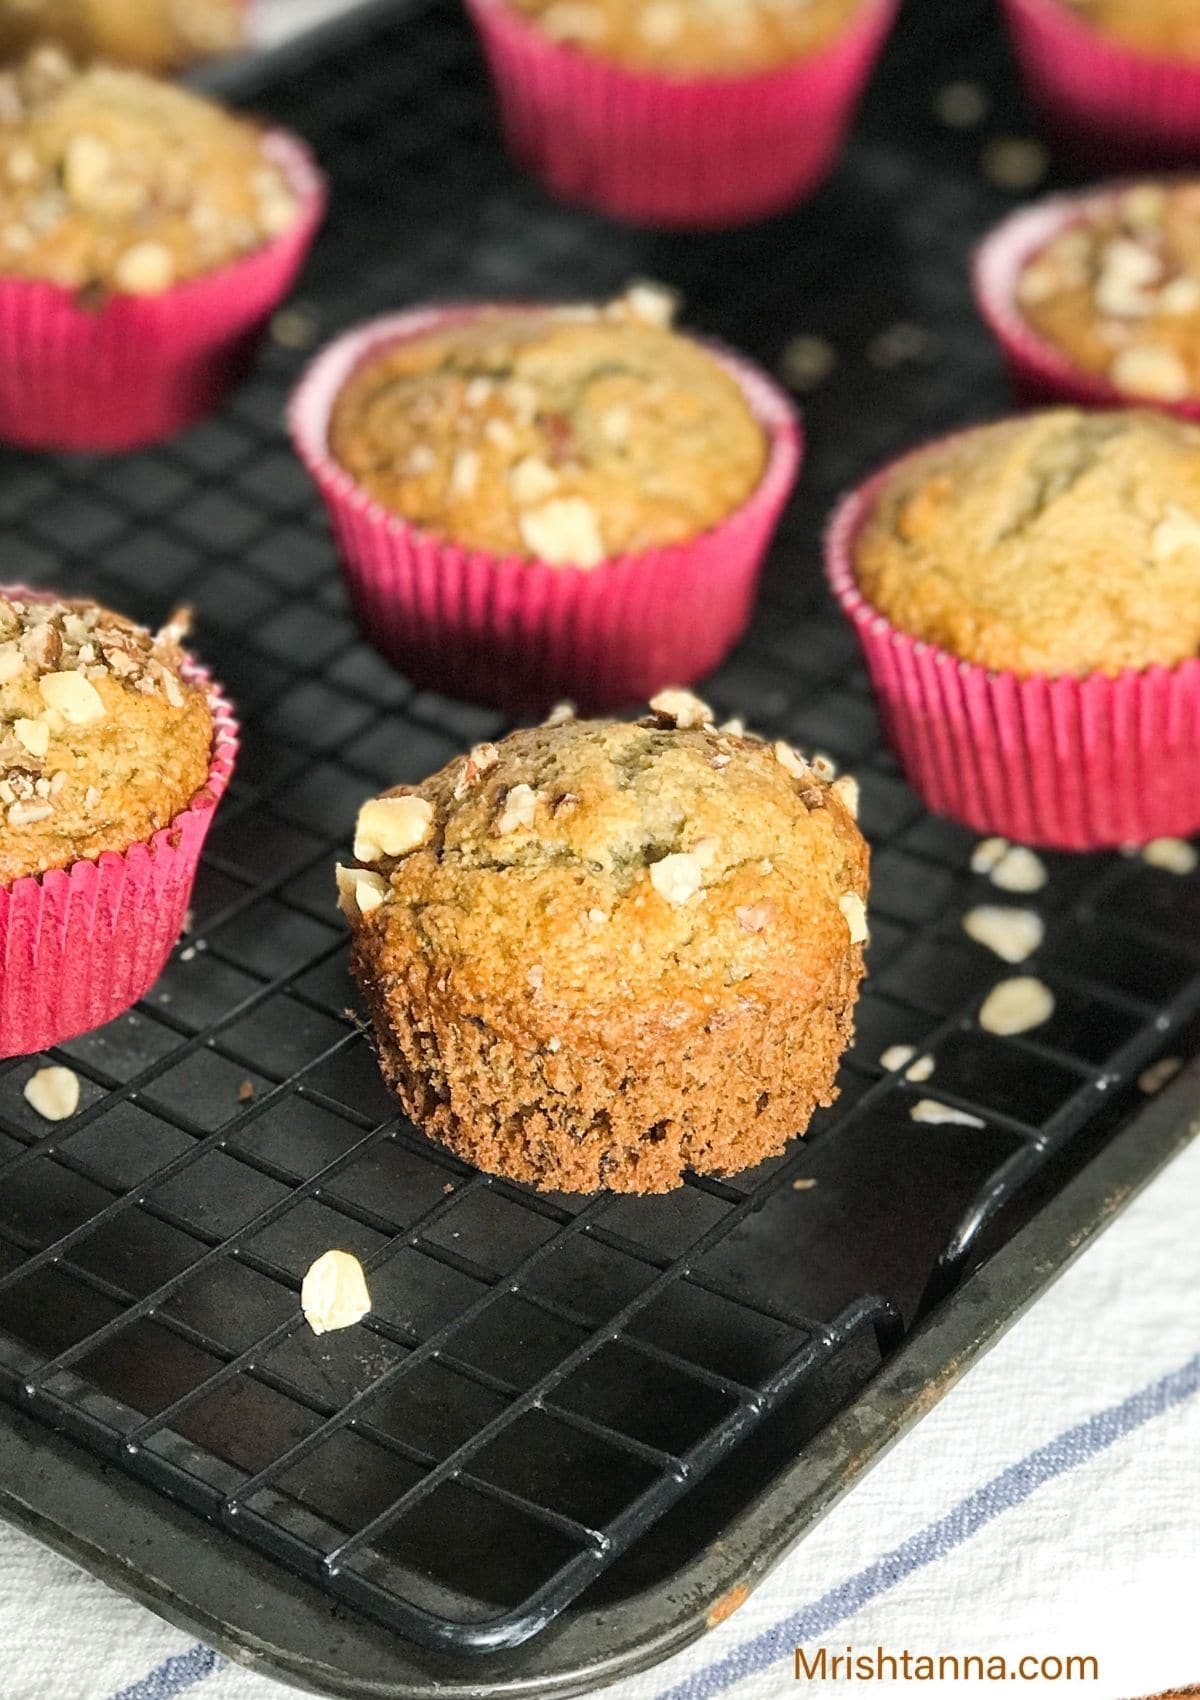 A close up of muffin and topped with rolled oats